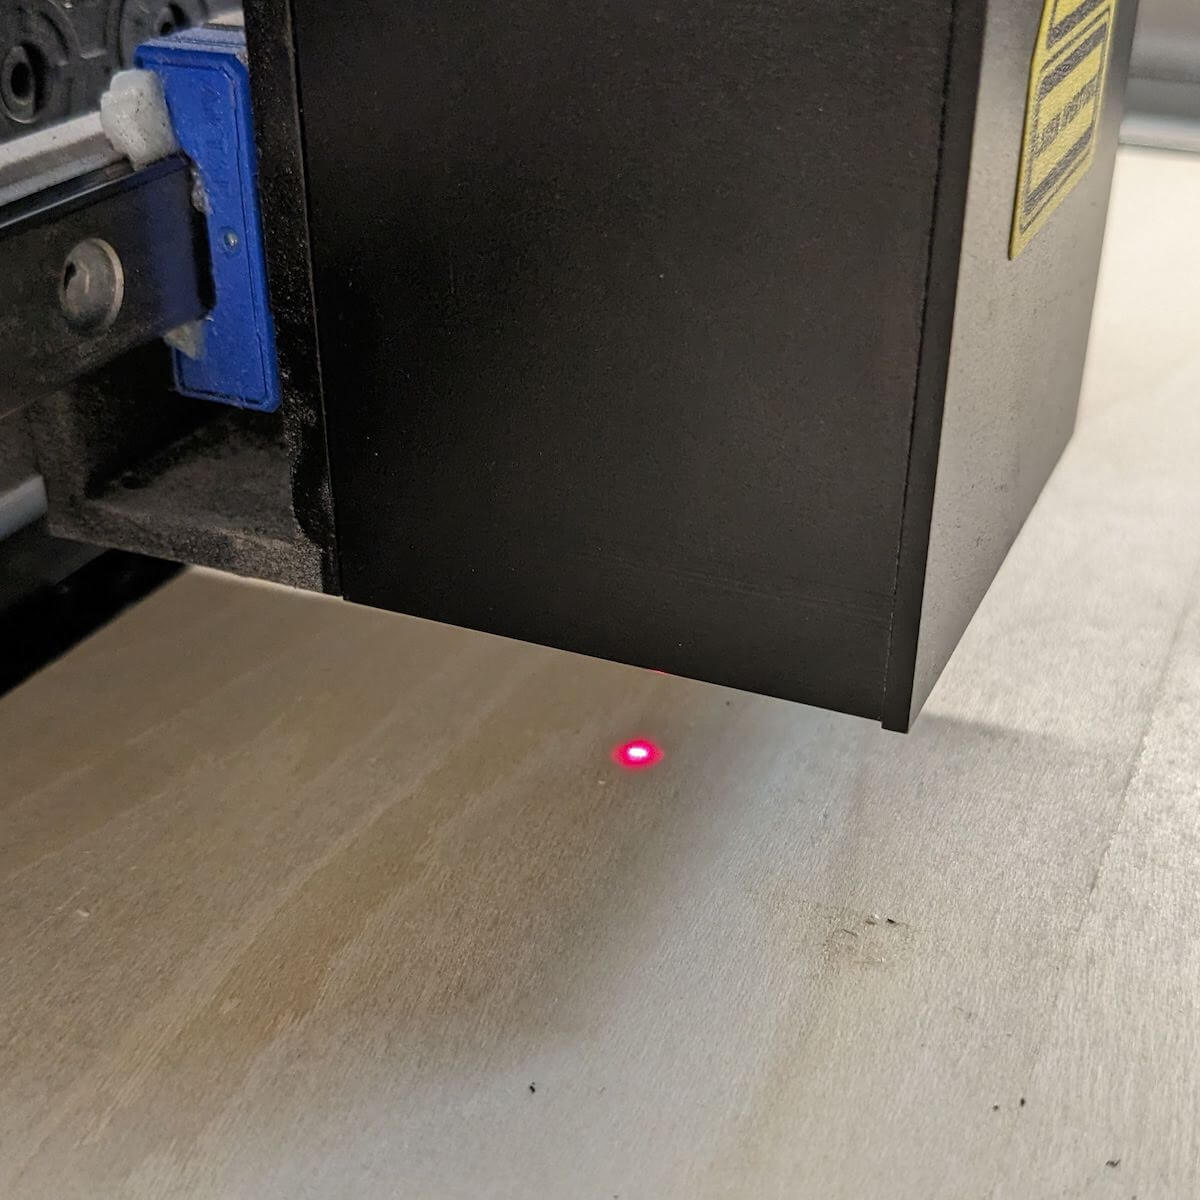 OMTech Lasers & Upgrades